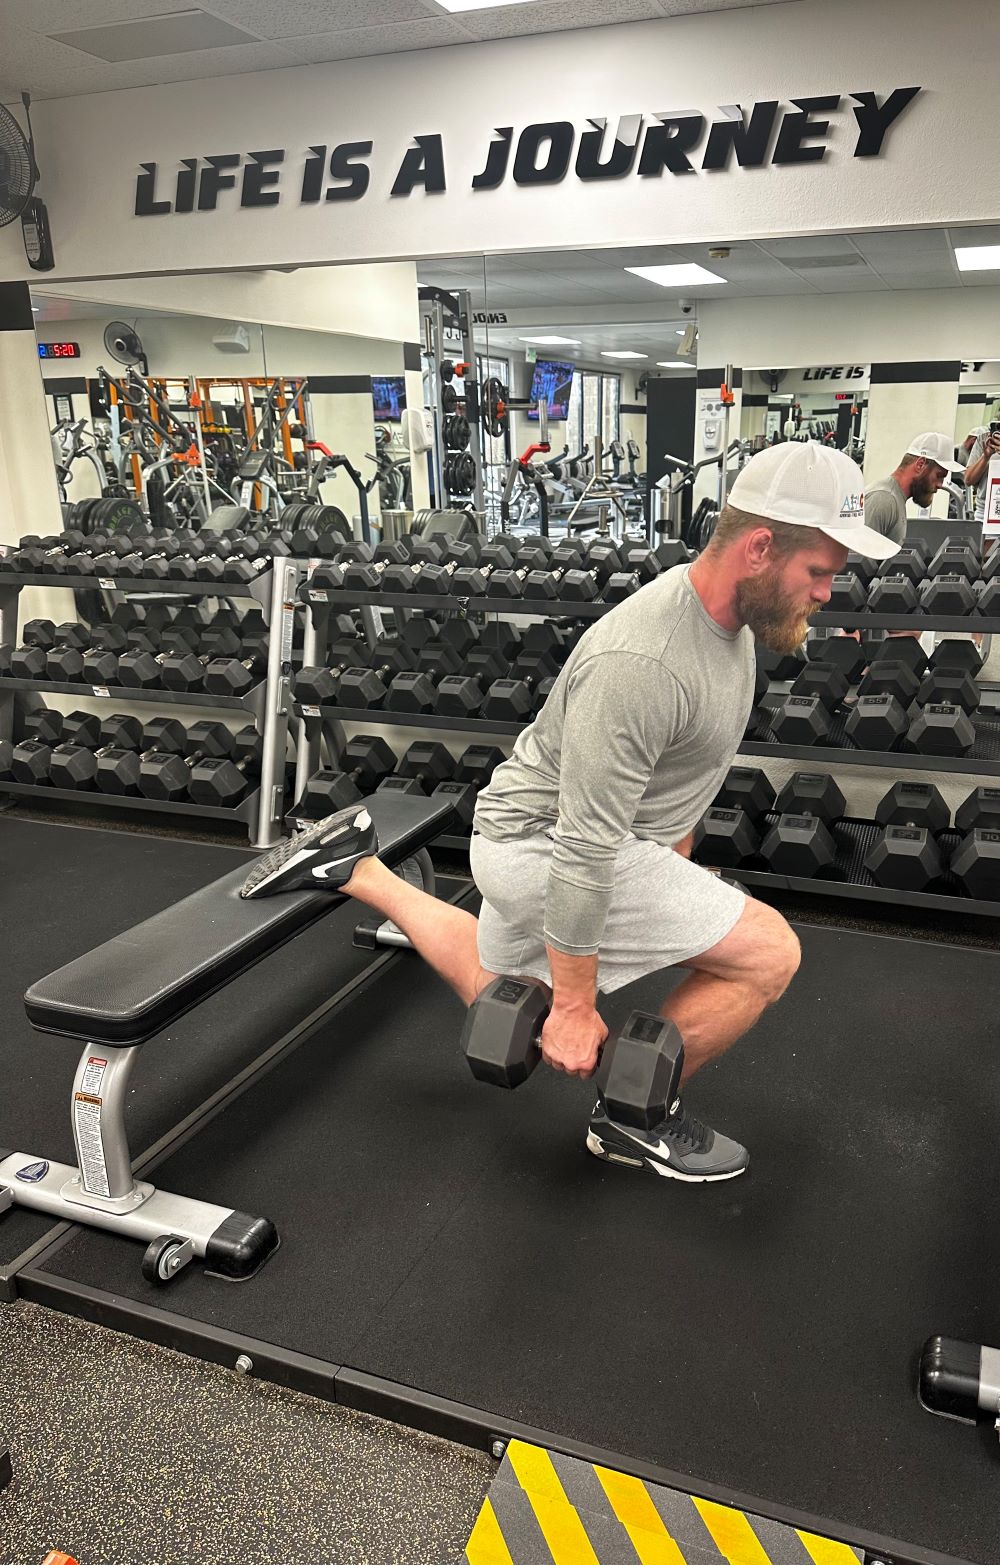 Man in white hat, gray shirt, and gray shorts performs Bulgarian split squat while holding dumbbells at AFAC gym